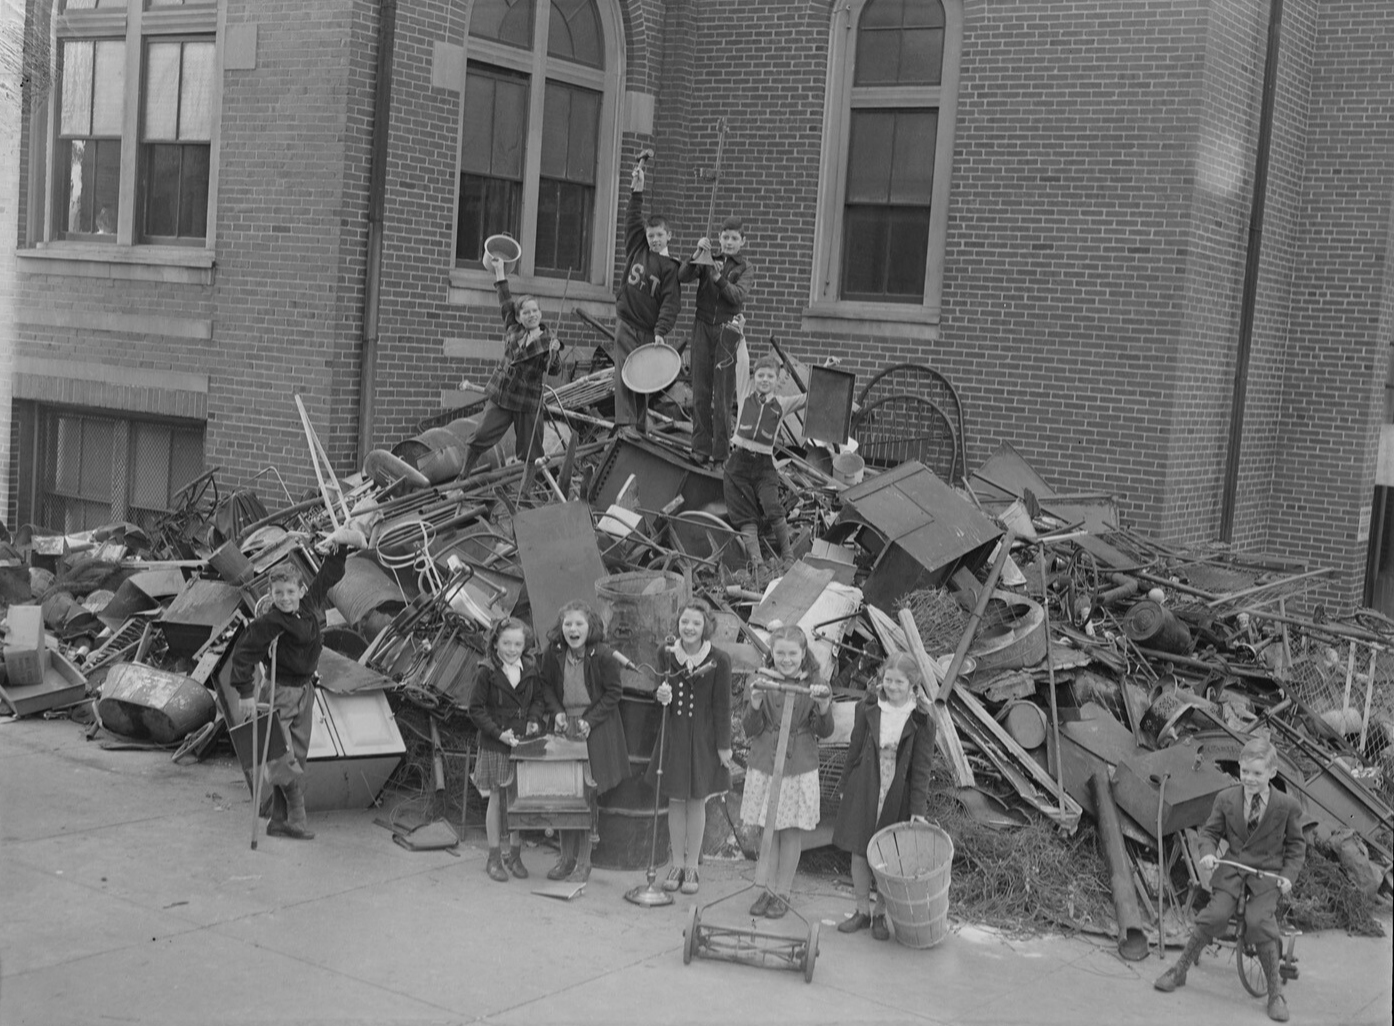 American children collecting scrap metal to support the war